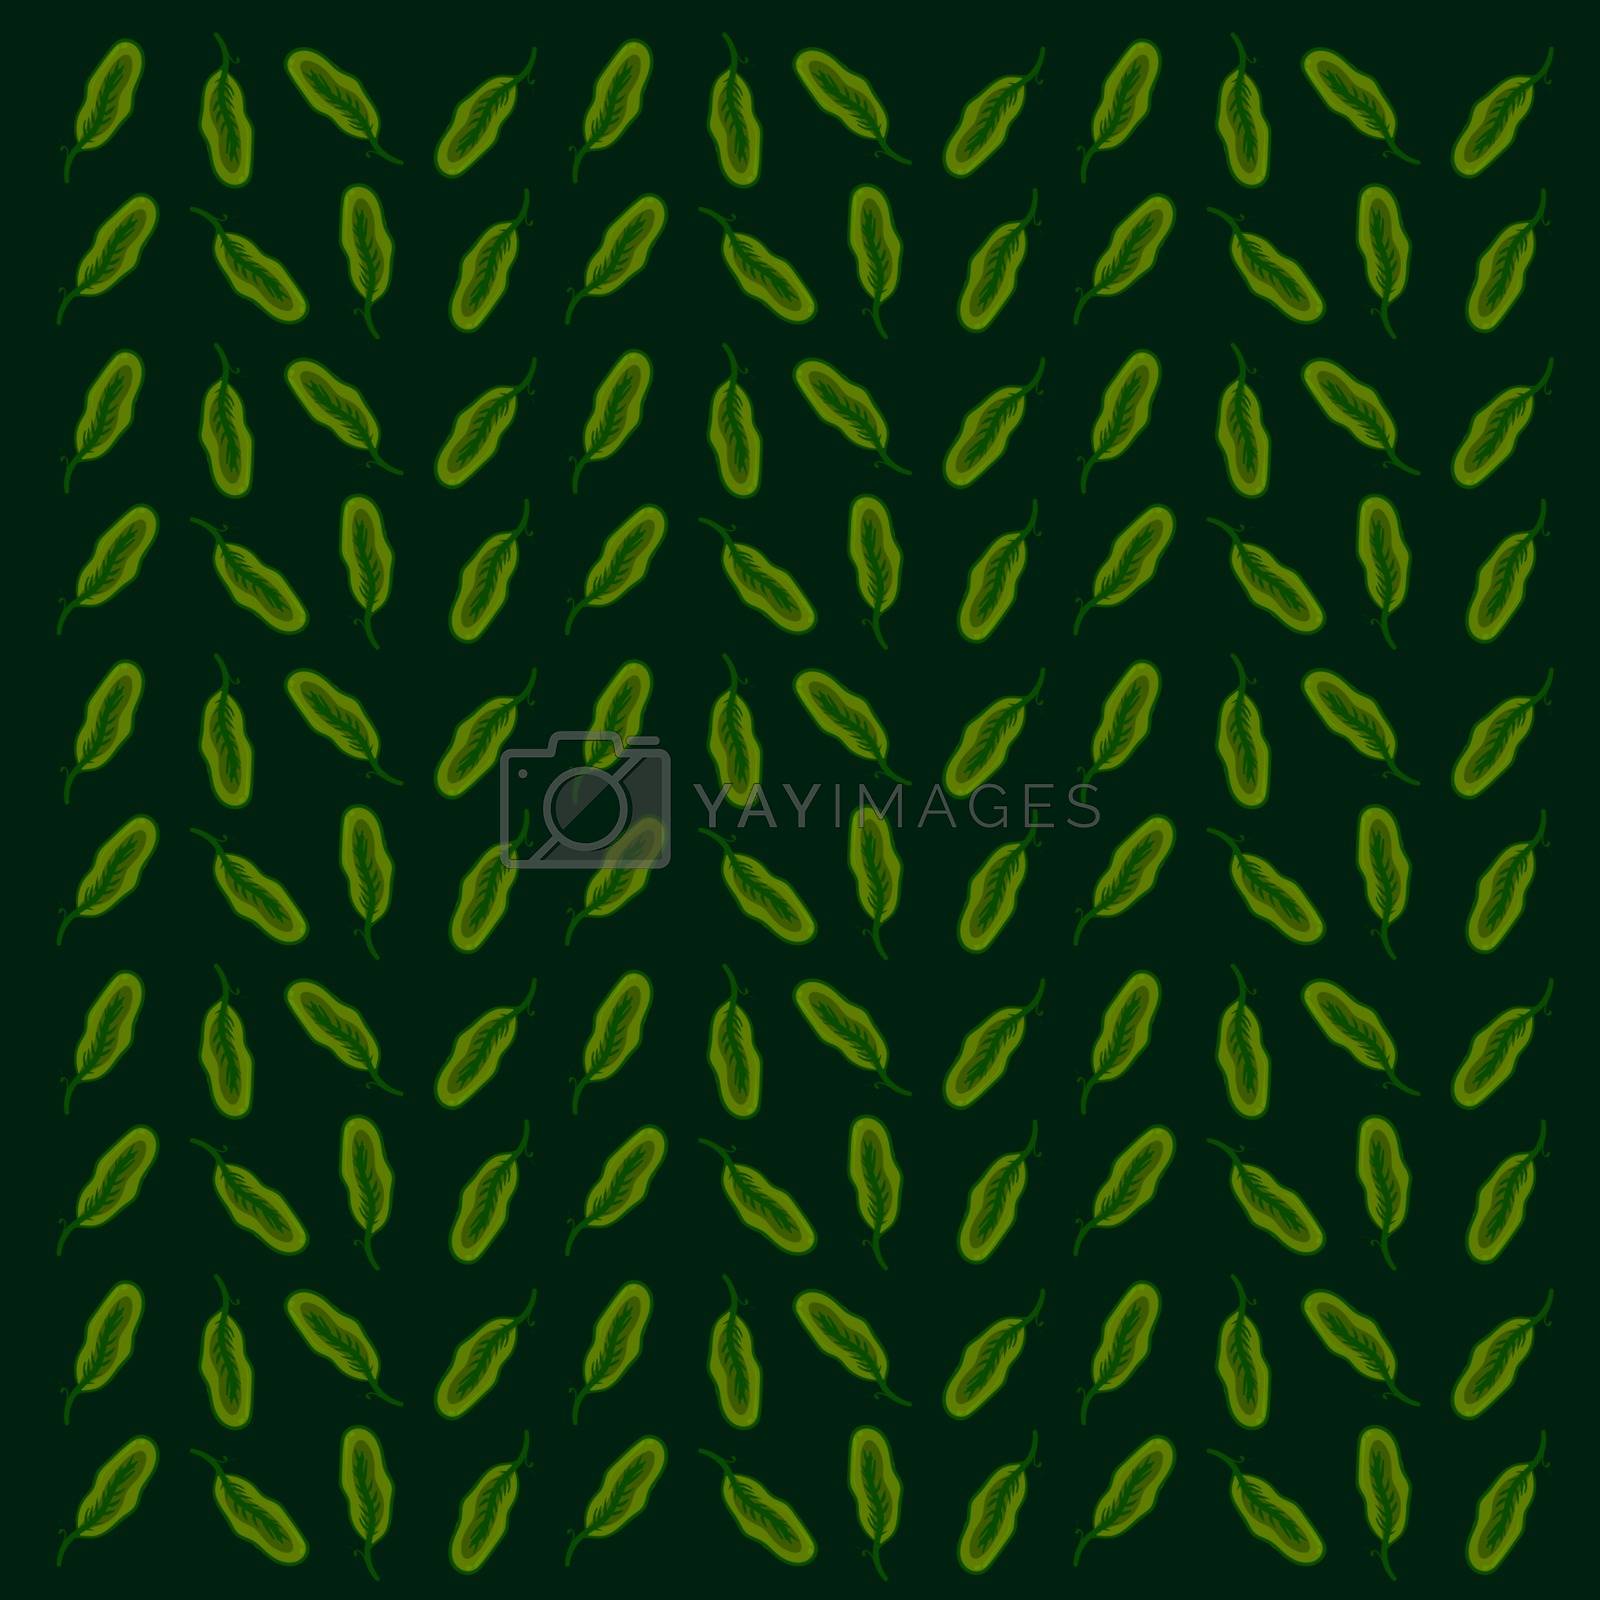 Royalty free image of Spinach wallpaper, illustration, vector on white background. by Morphart